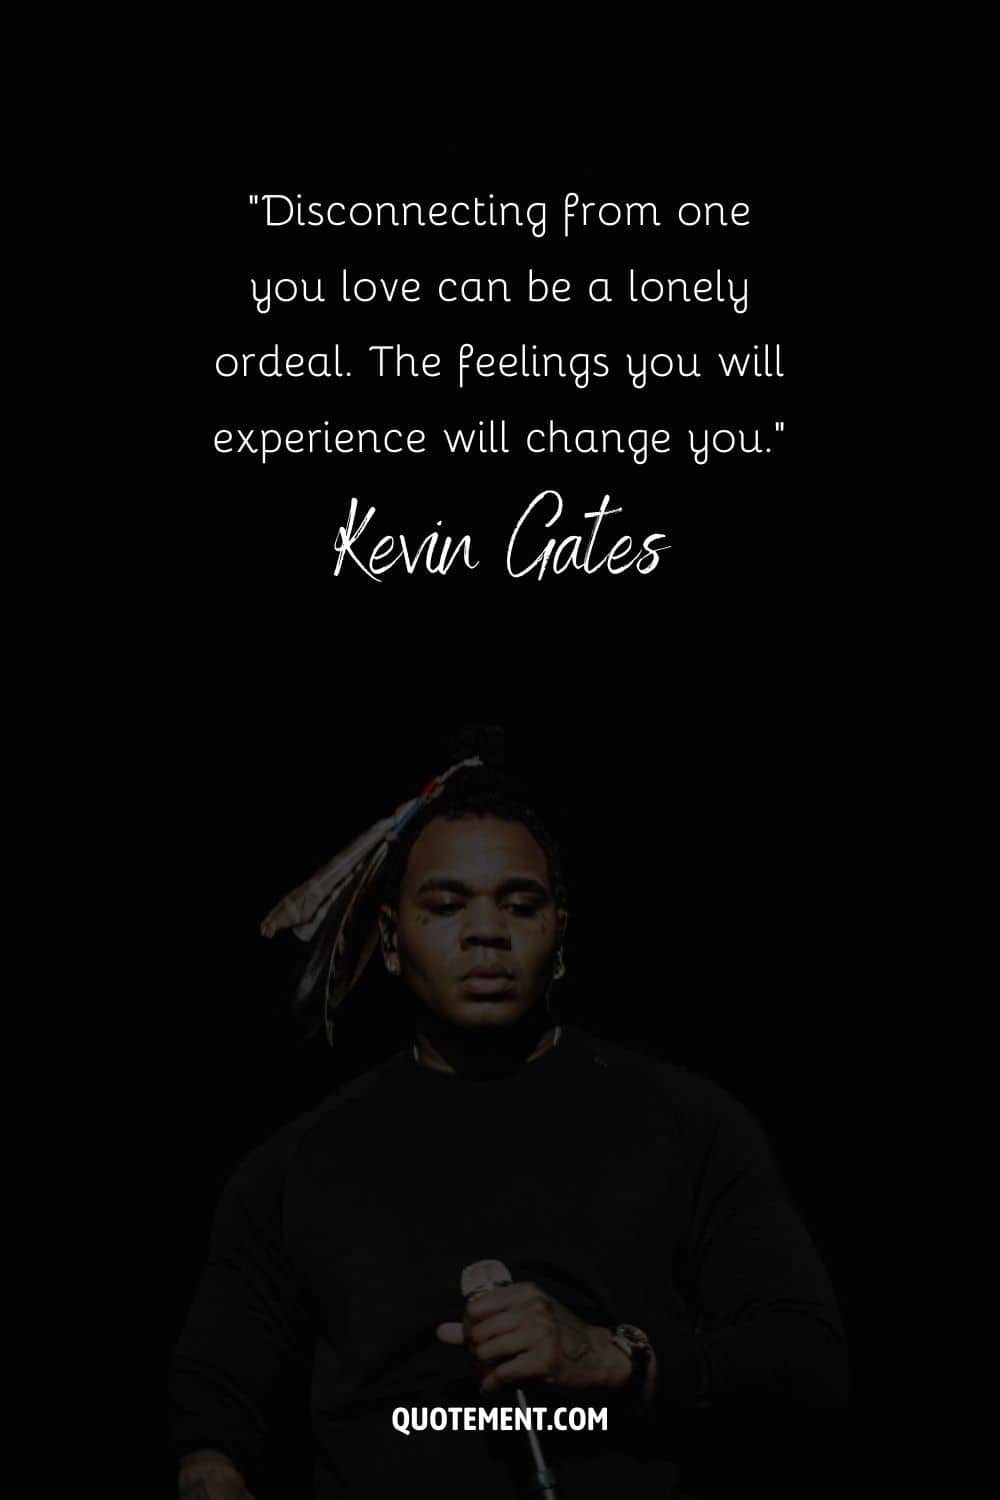 “Disconnecting from one you love can be a lonely ordeal. The feelings you will experience will change you.” – Kevin Gates